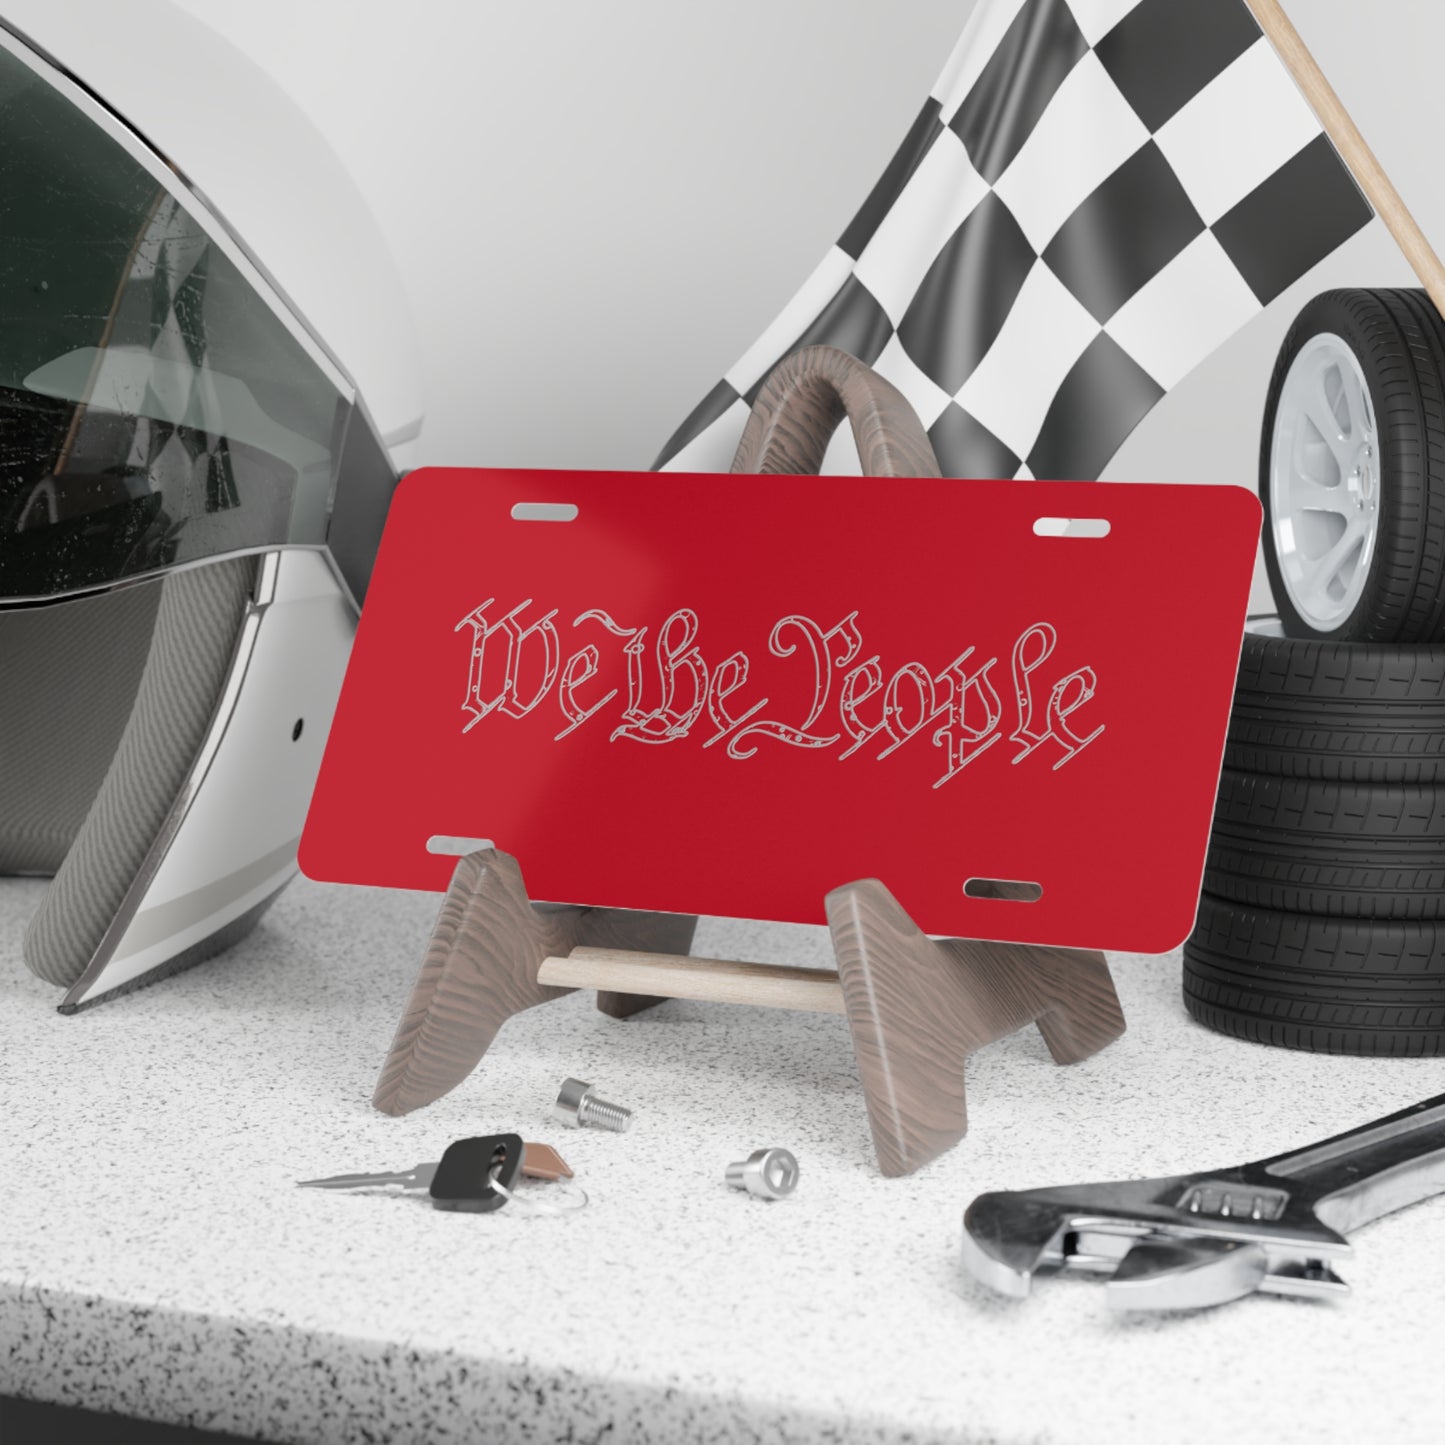 We the People Tattered by Revival Aluminum Vanity Plate Red